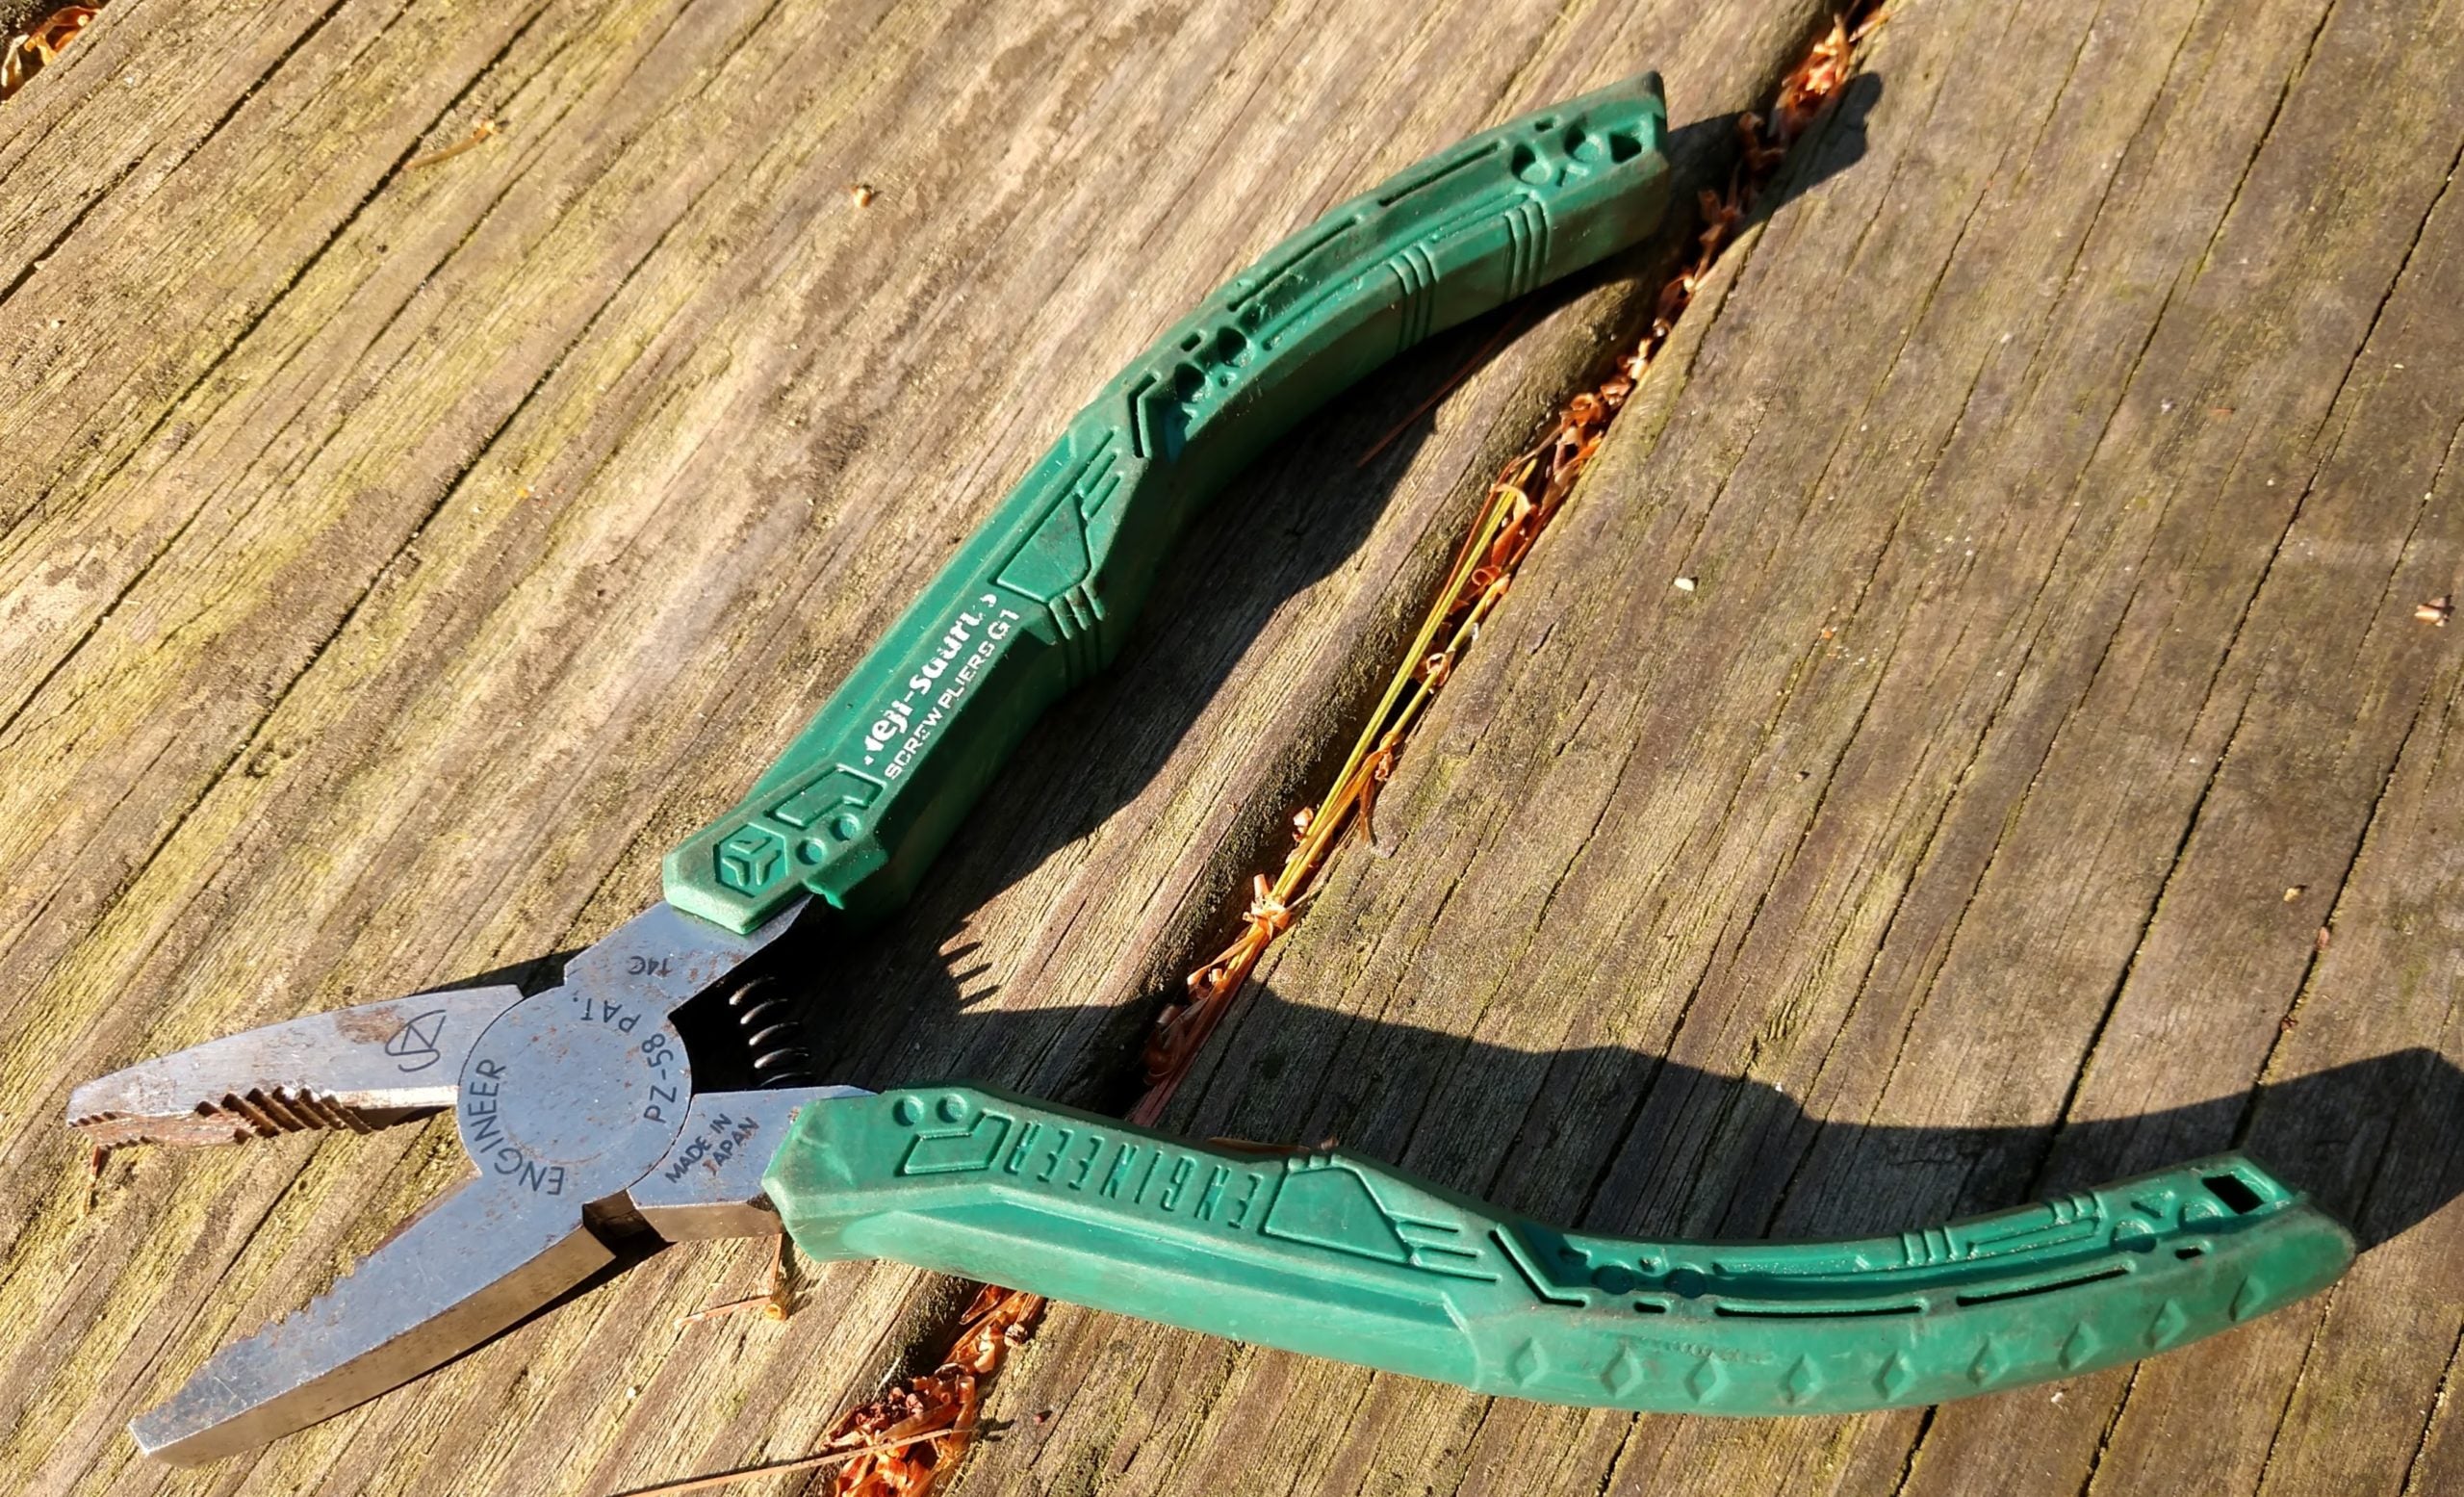 Locking pliers (vise grips) preferences : r/Tools